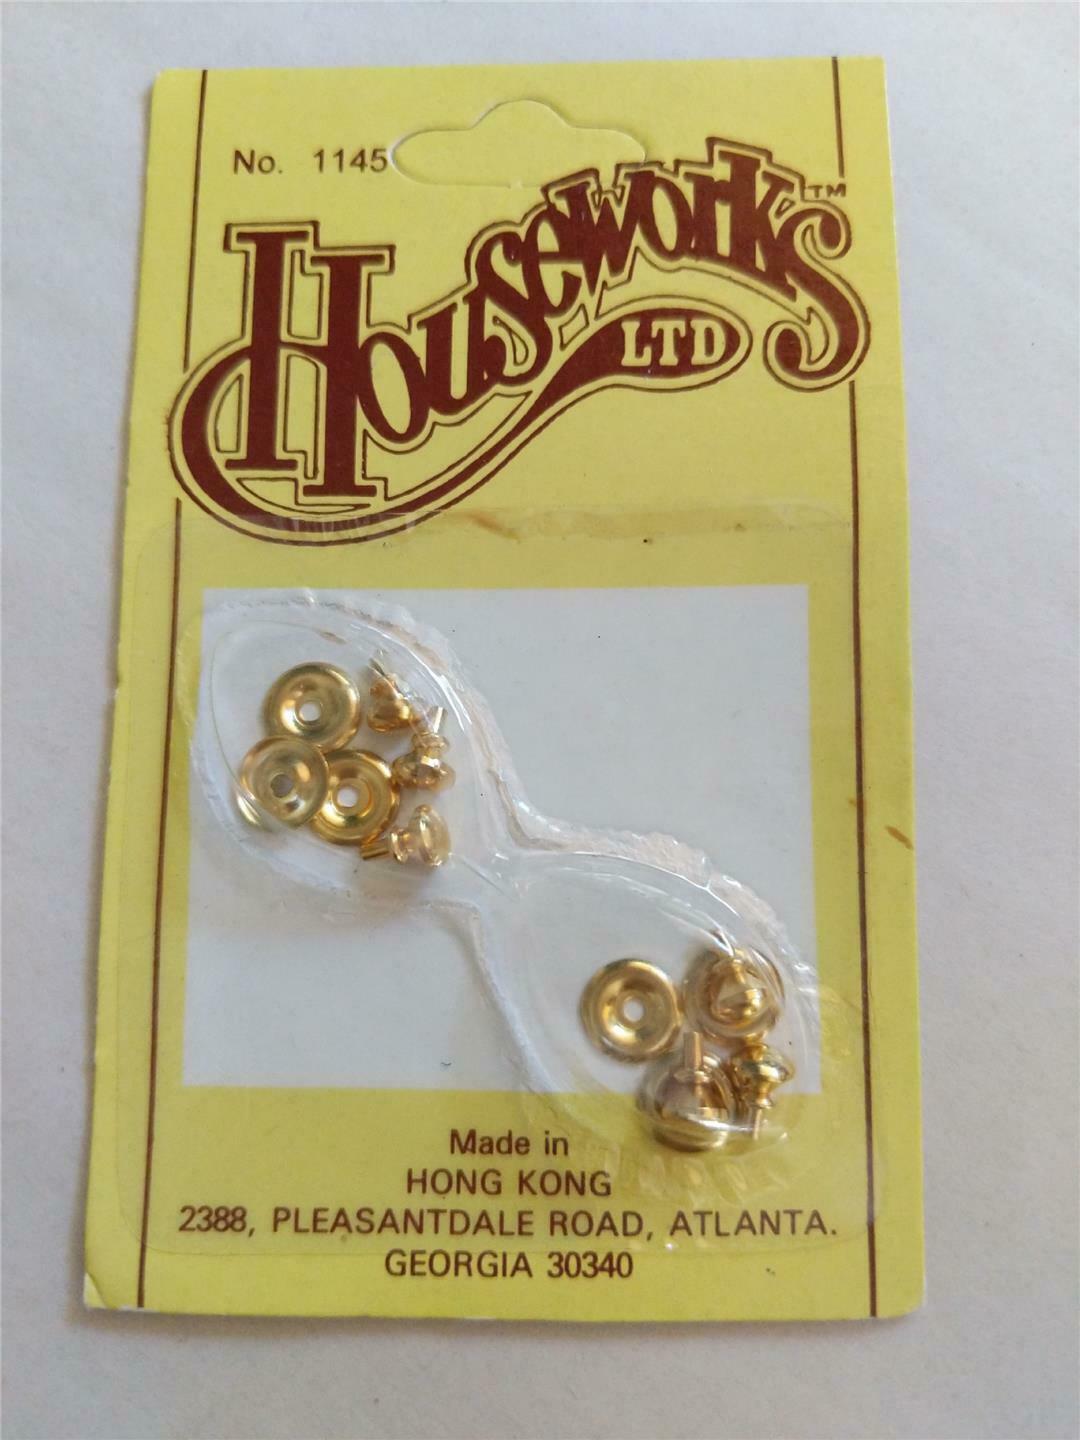 Houseworks #1145 Dollhouse 1:12 (1") Scale Gold Plated Door Knob & Escutcheon